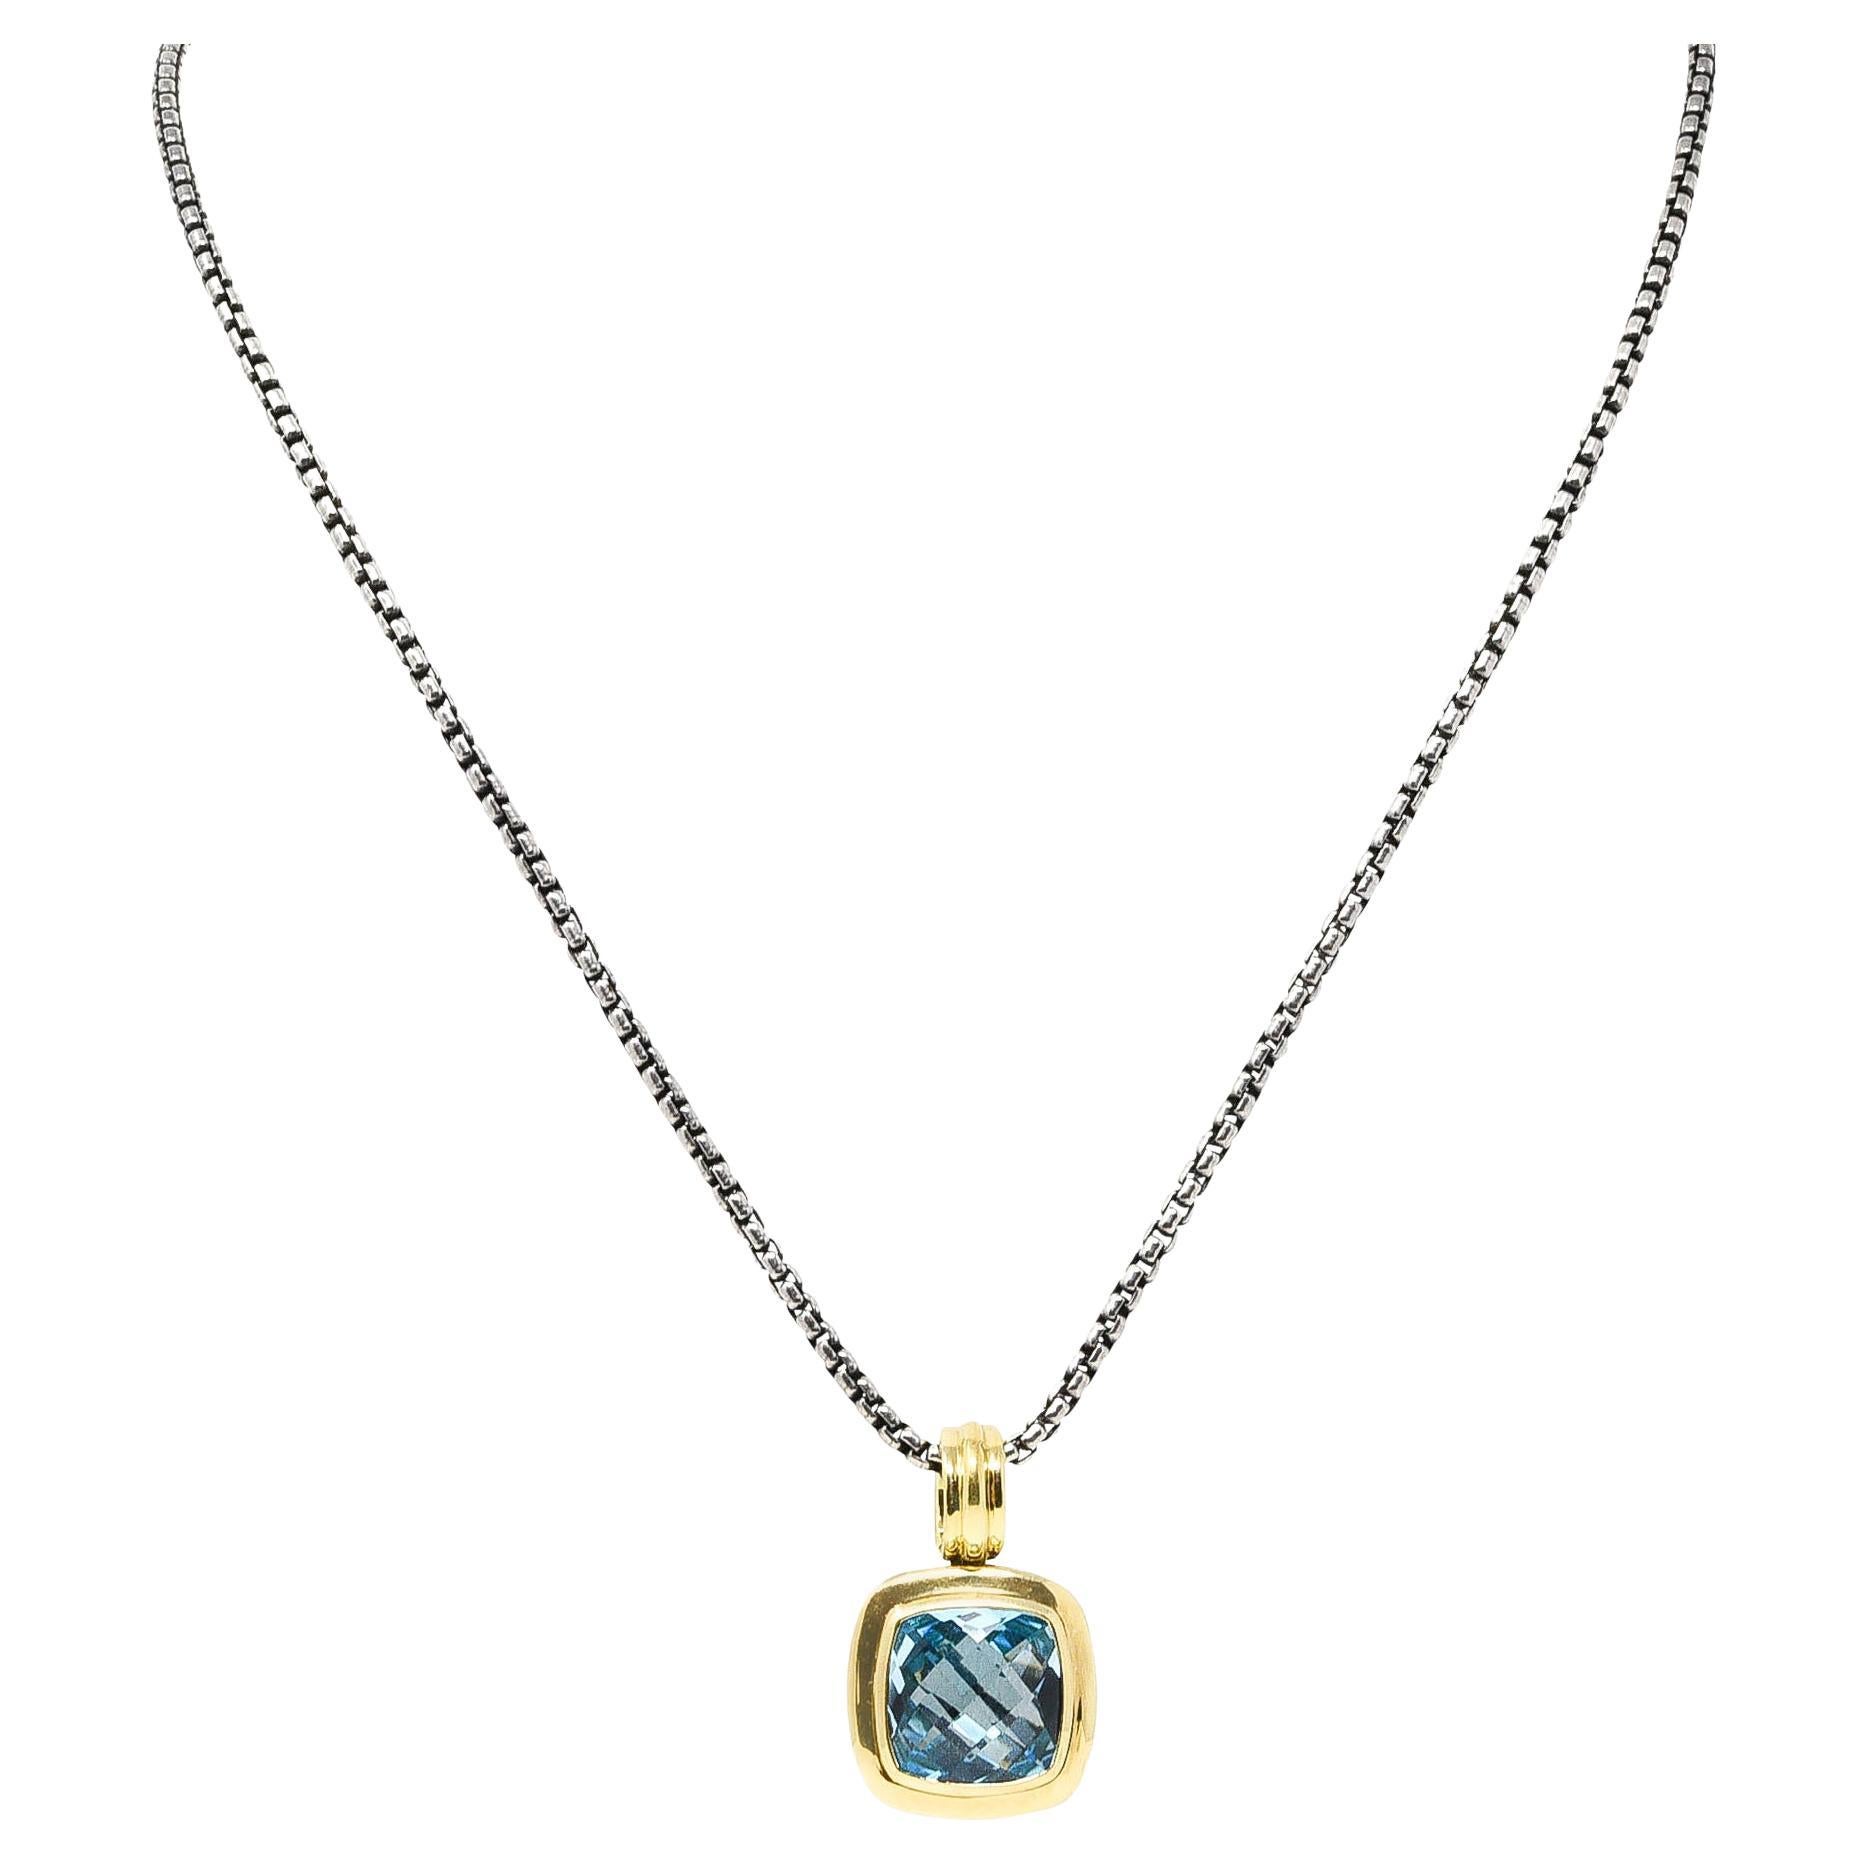 Necklace designed as square enhancer pendant suspended from 2.0 mm box chain 

Centers bezel set mixed cushion cut blue topaz measuring 14.0 x 14.0 mm

Topaz is transparent vibrant blue with high polished gold surround

Accented by silver classic